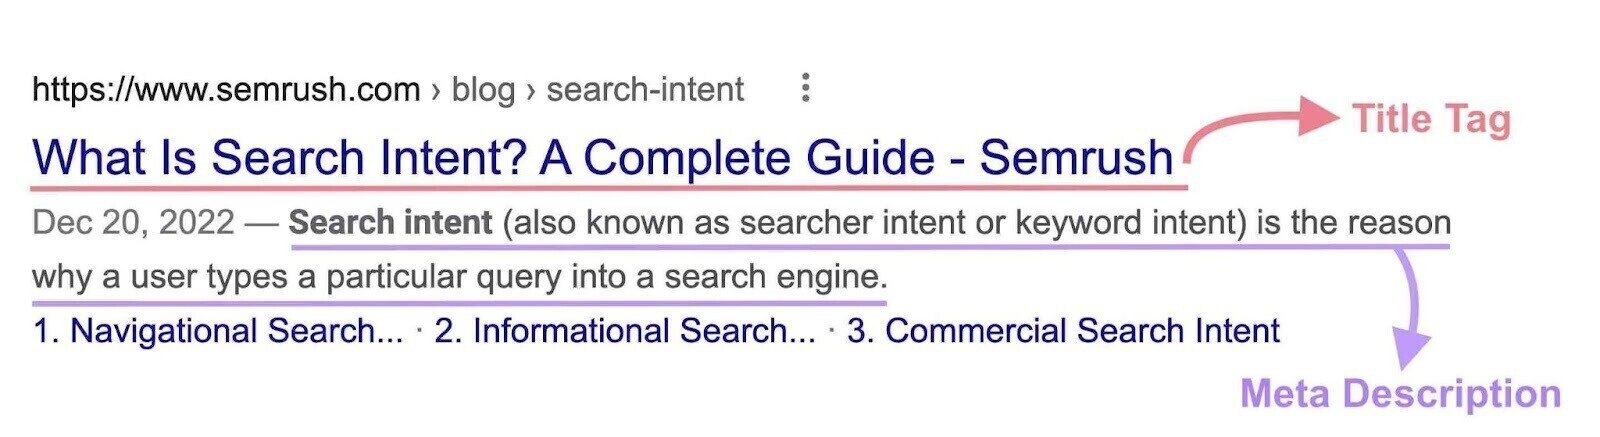 Title tag and meta statement  shown connected  Google SERP